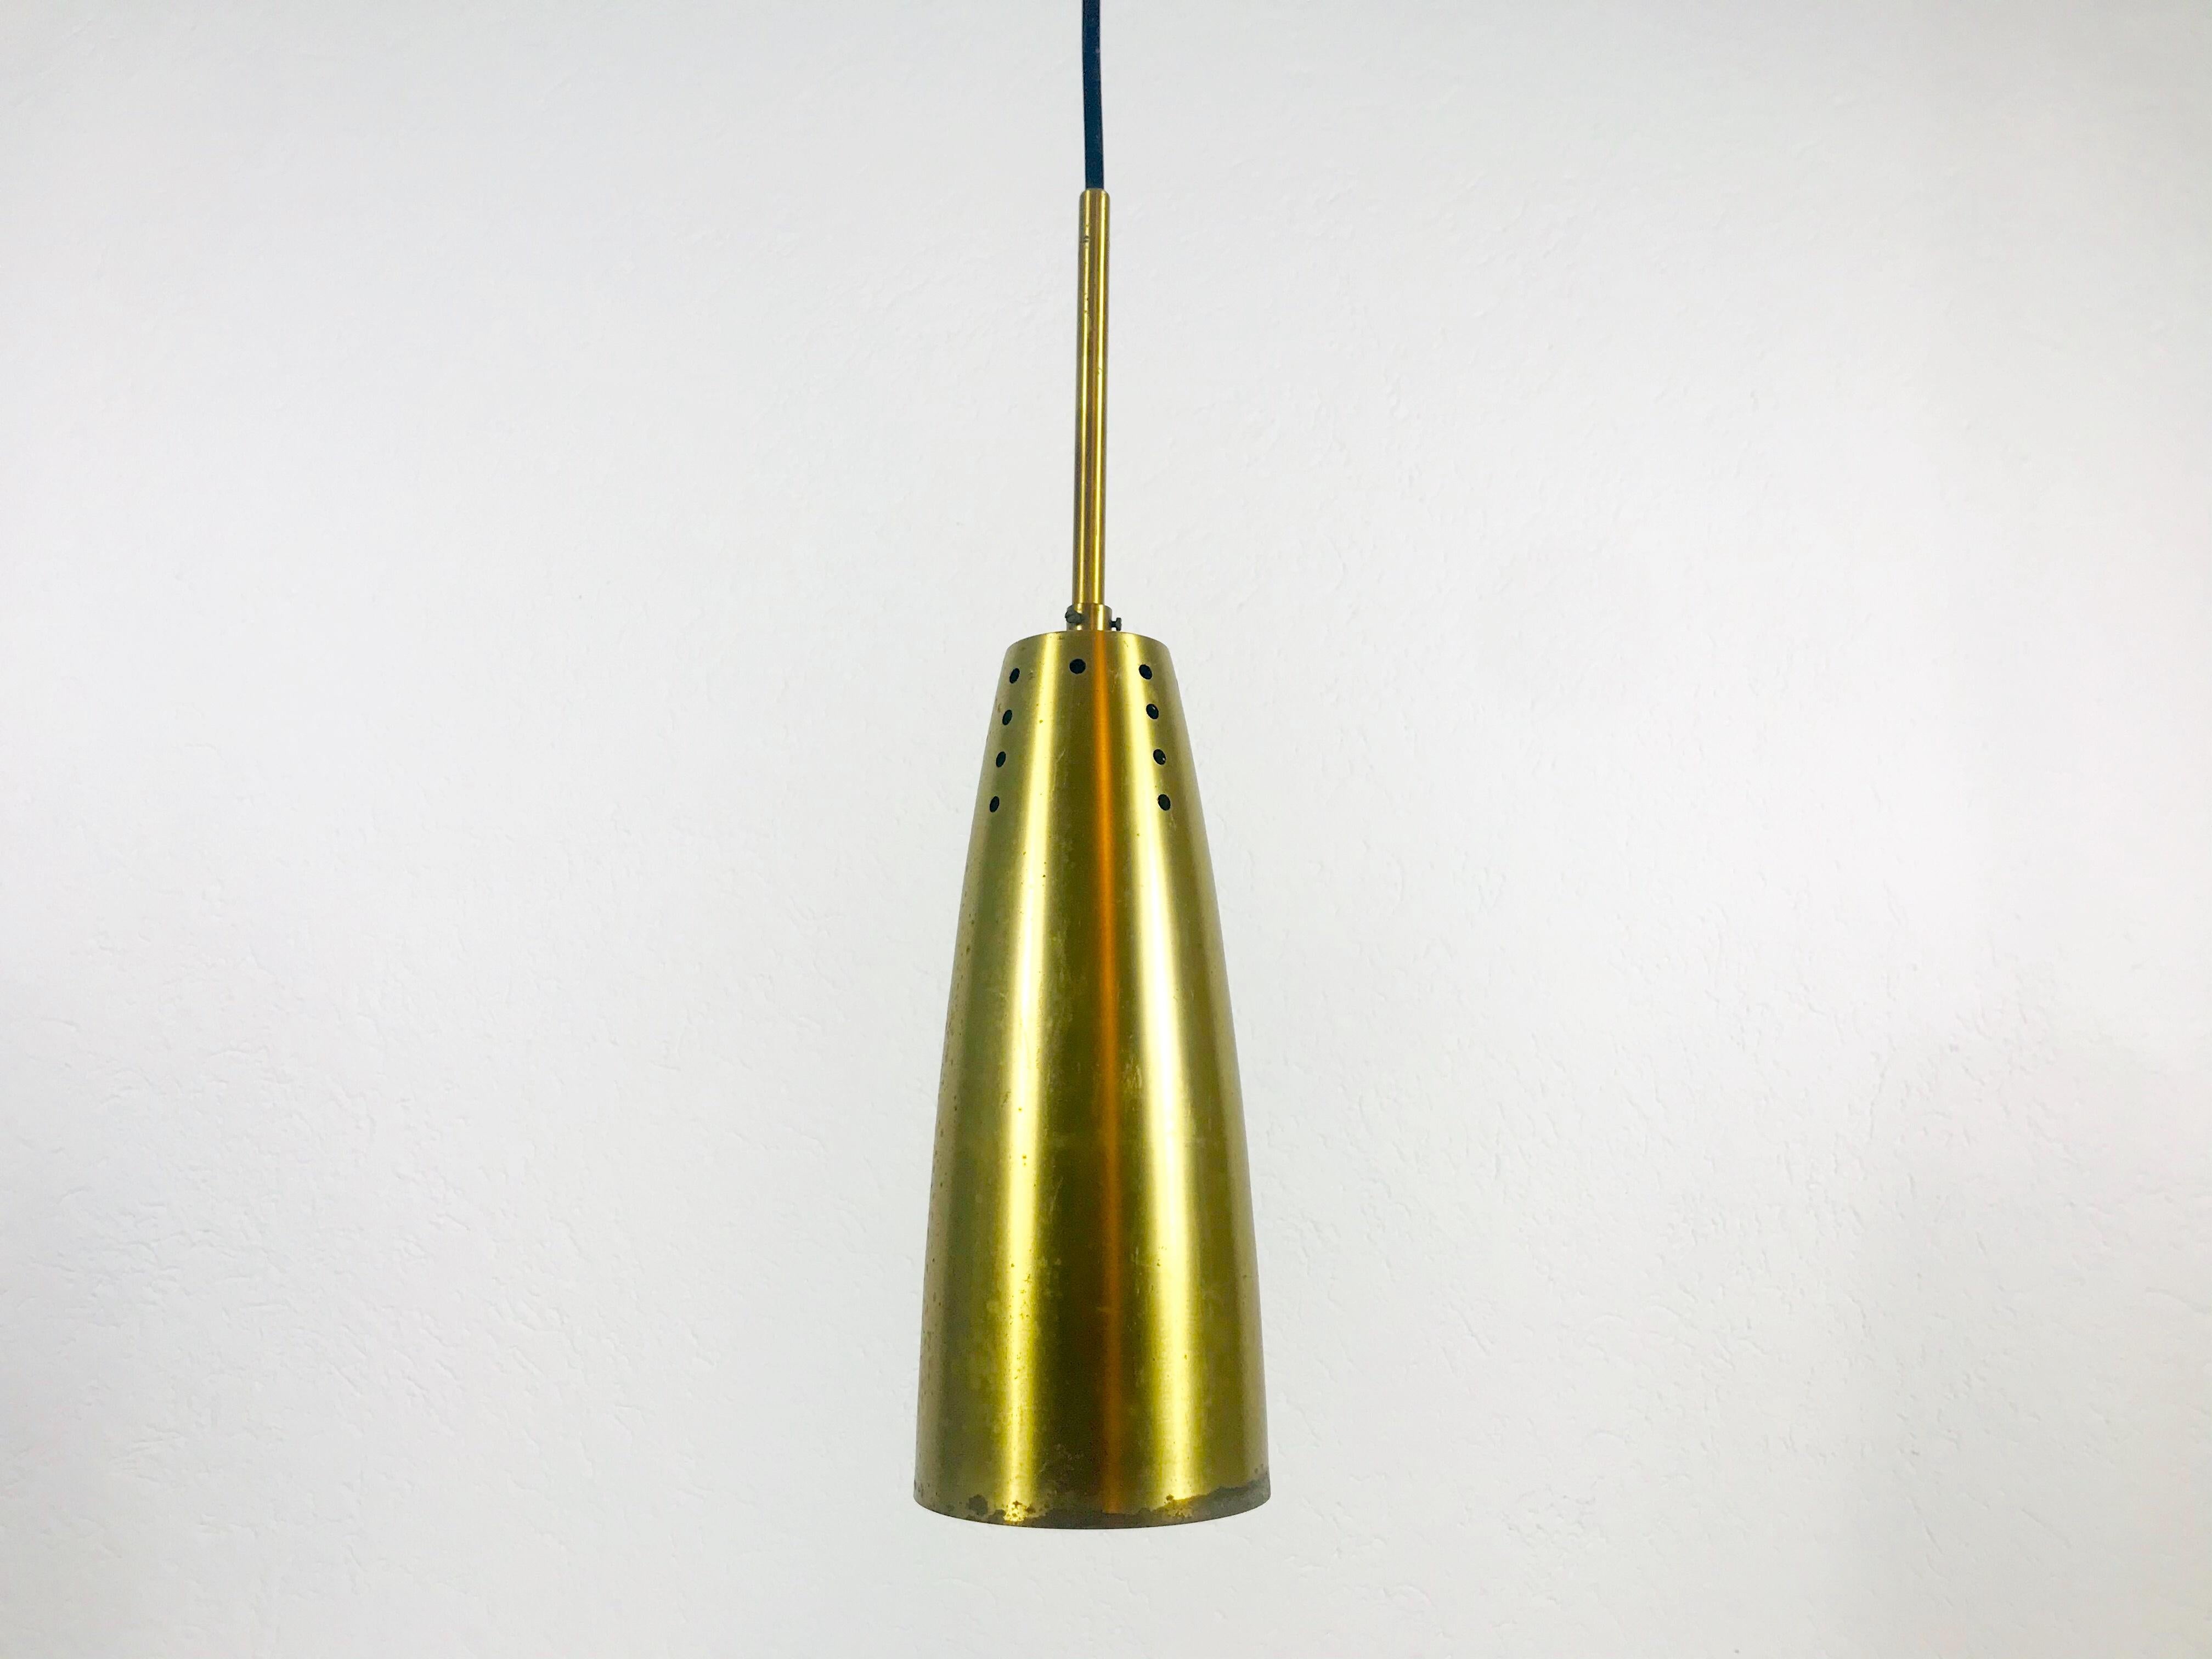 Mid-20th Century Pair of Full Brass Mid-Century Modern Pendant Lamps, 1950s, Germany For Sale